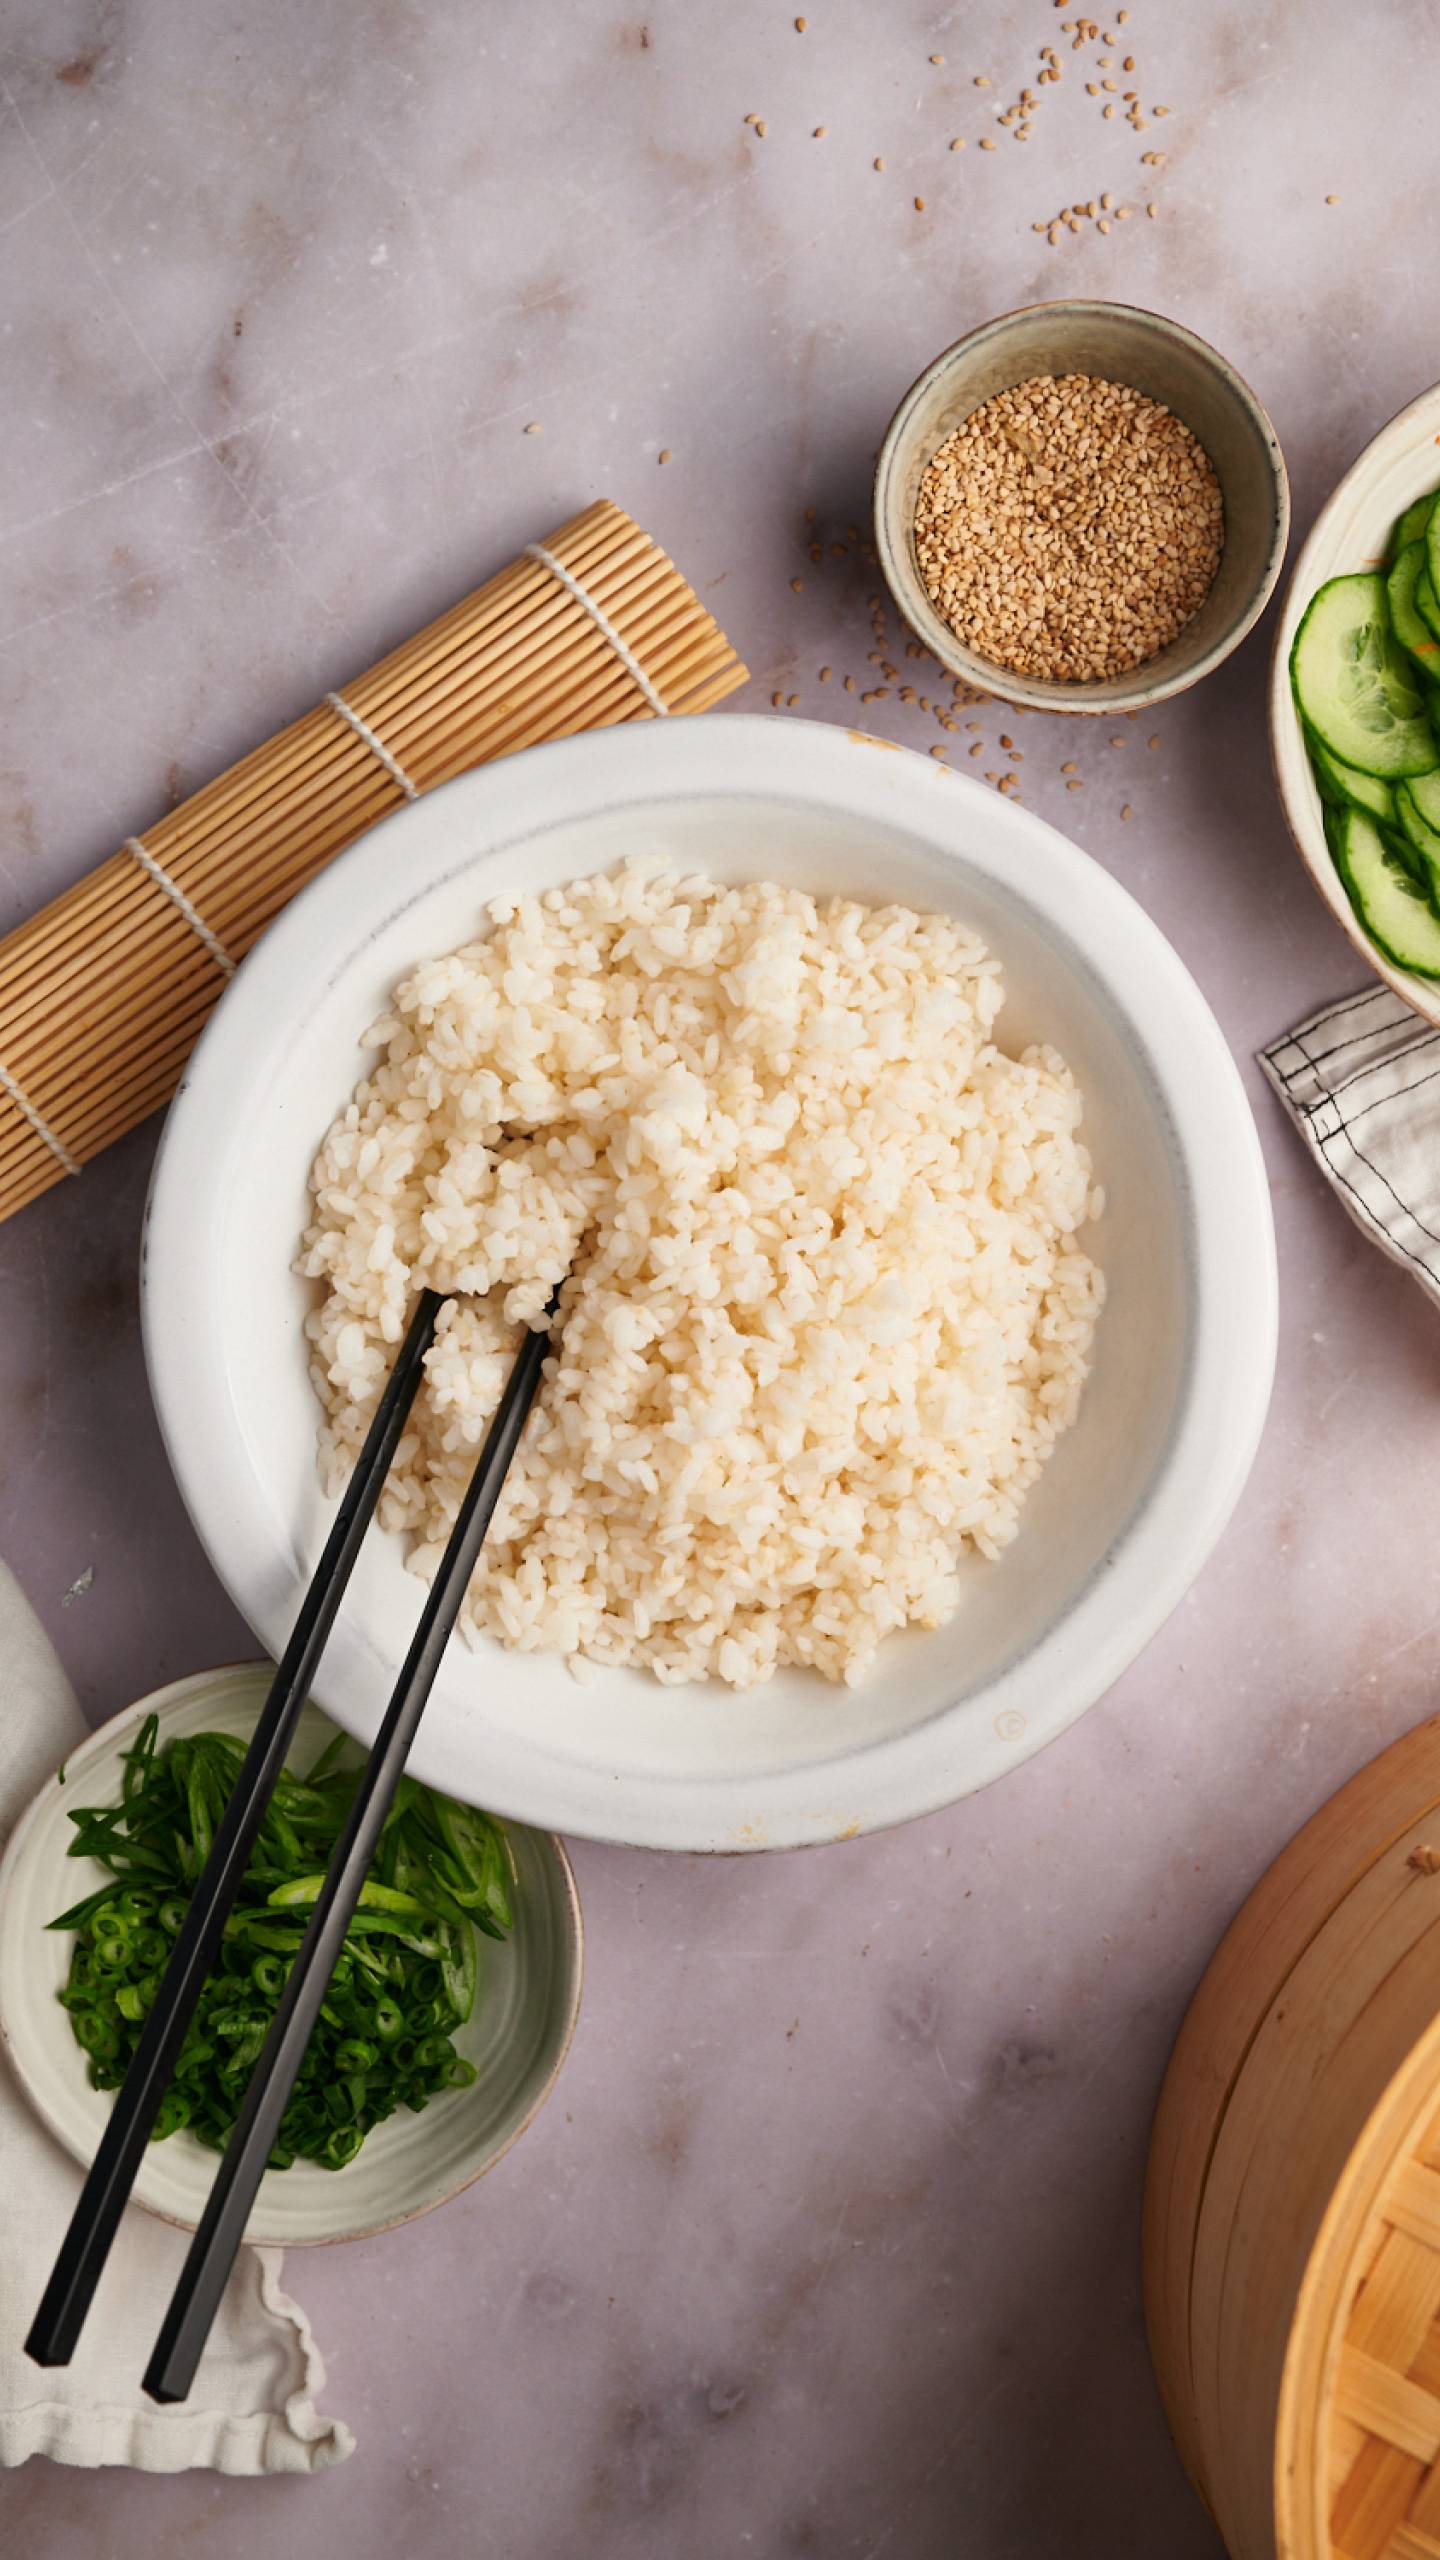 Sushi Rice Recipe, How To Cook Sushi Rice